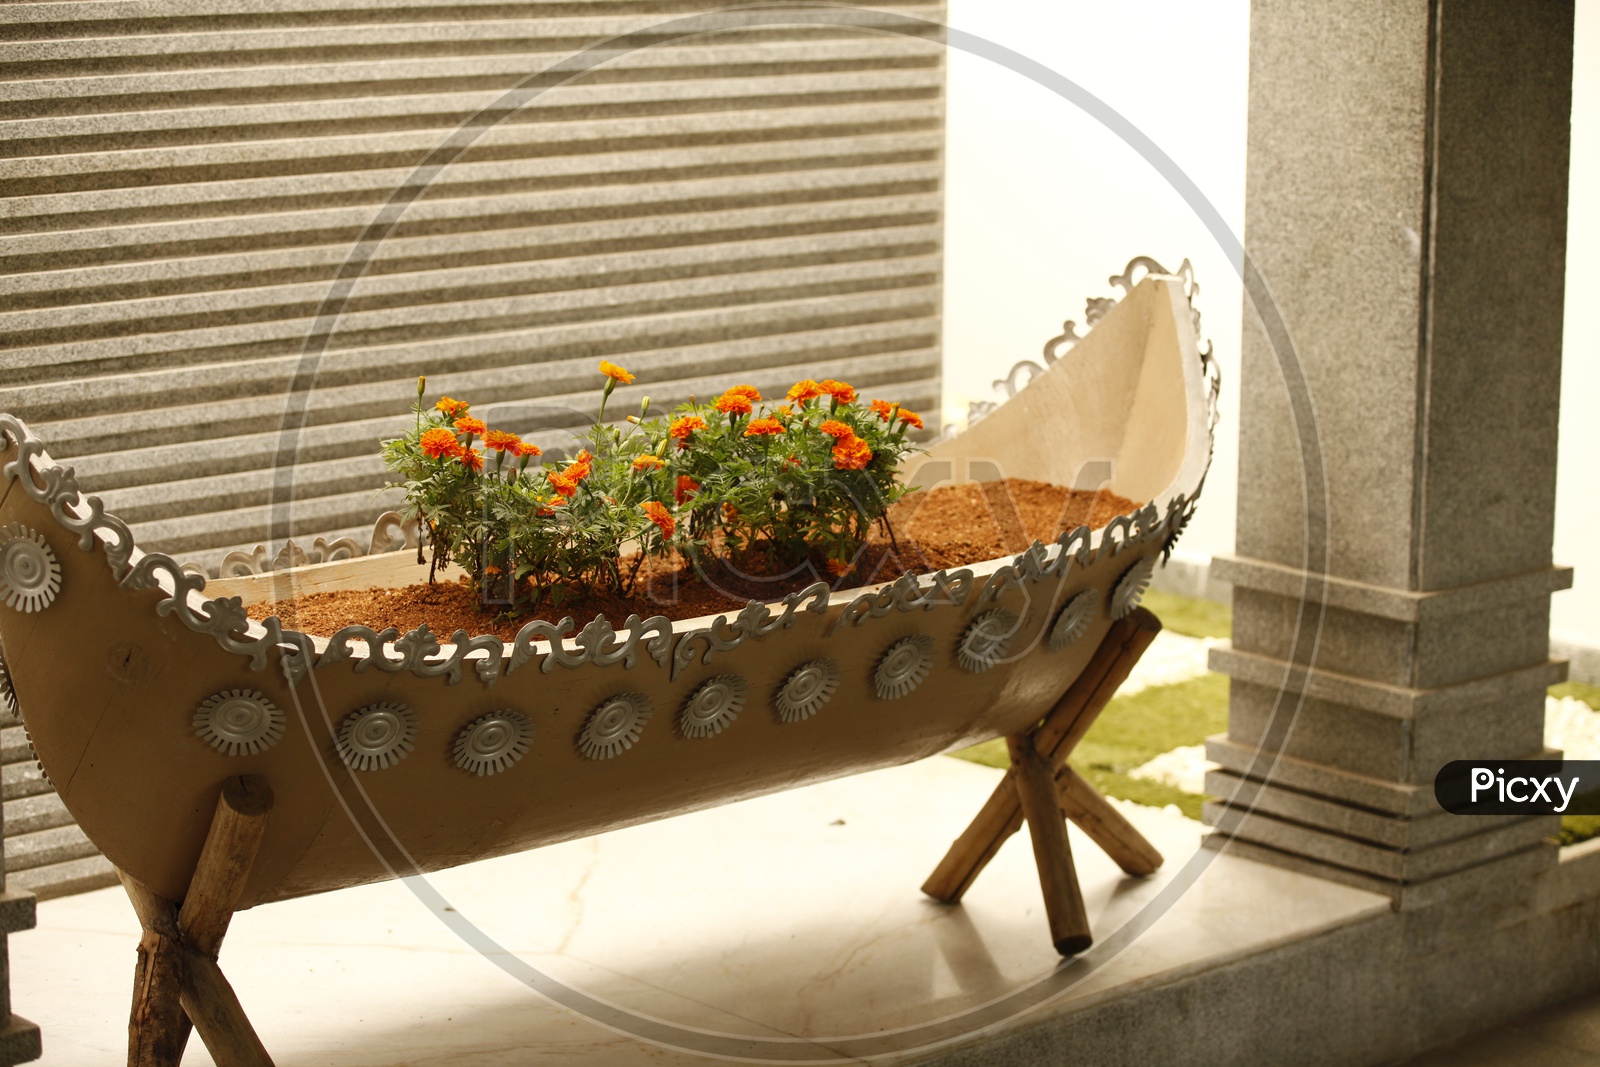 A boat shaped pot with marigold plants